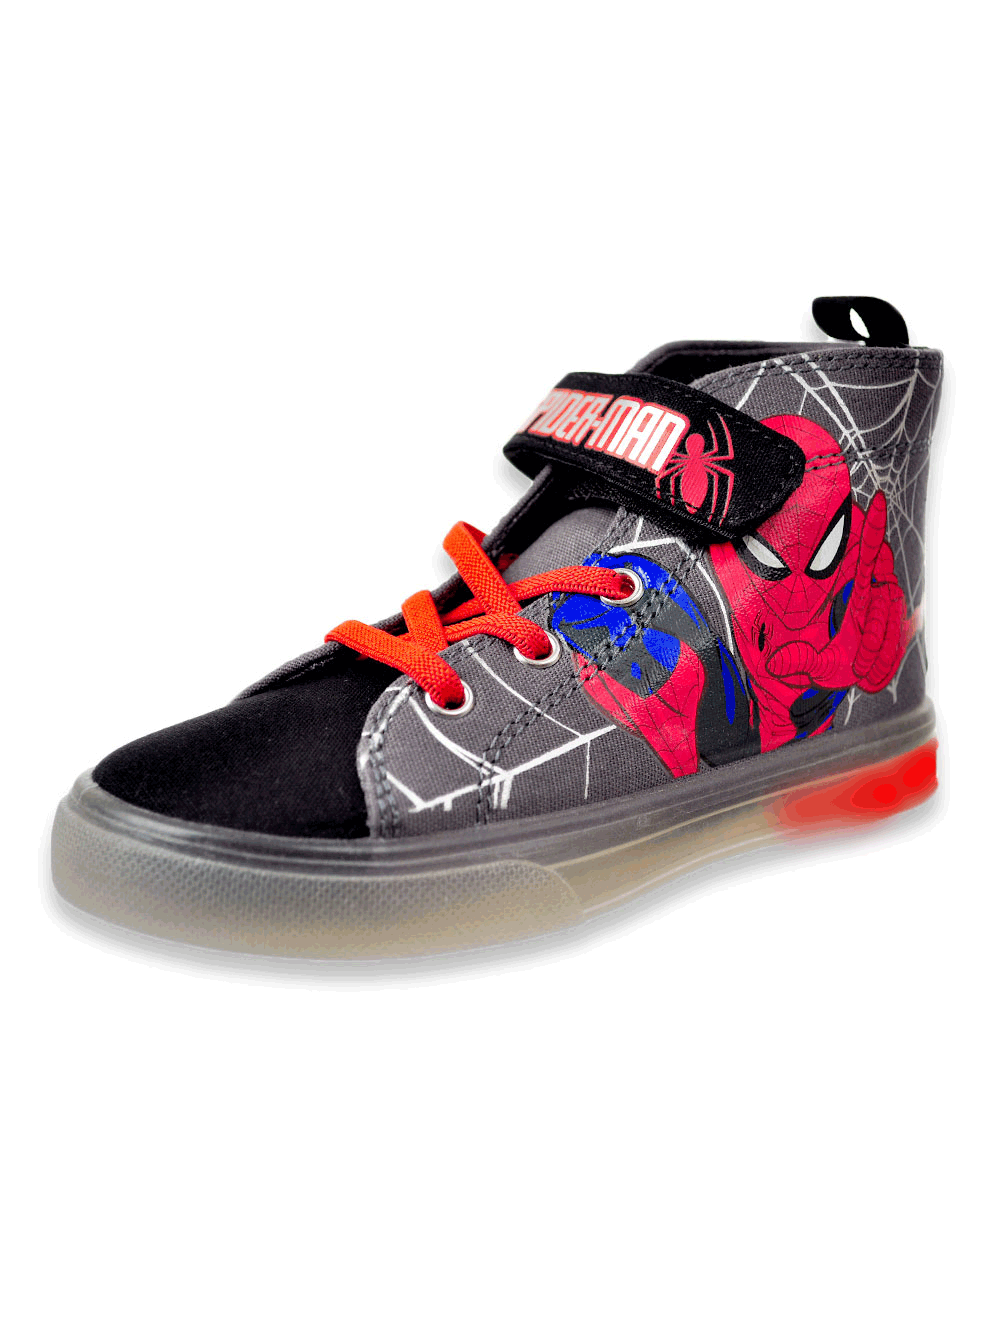 boys light up sneakers